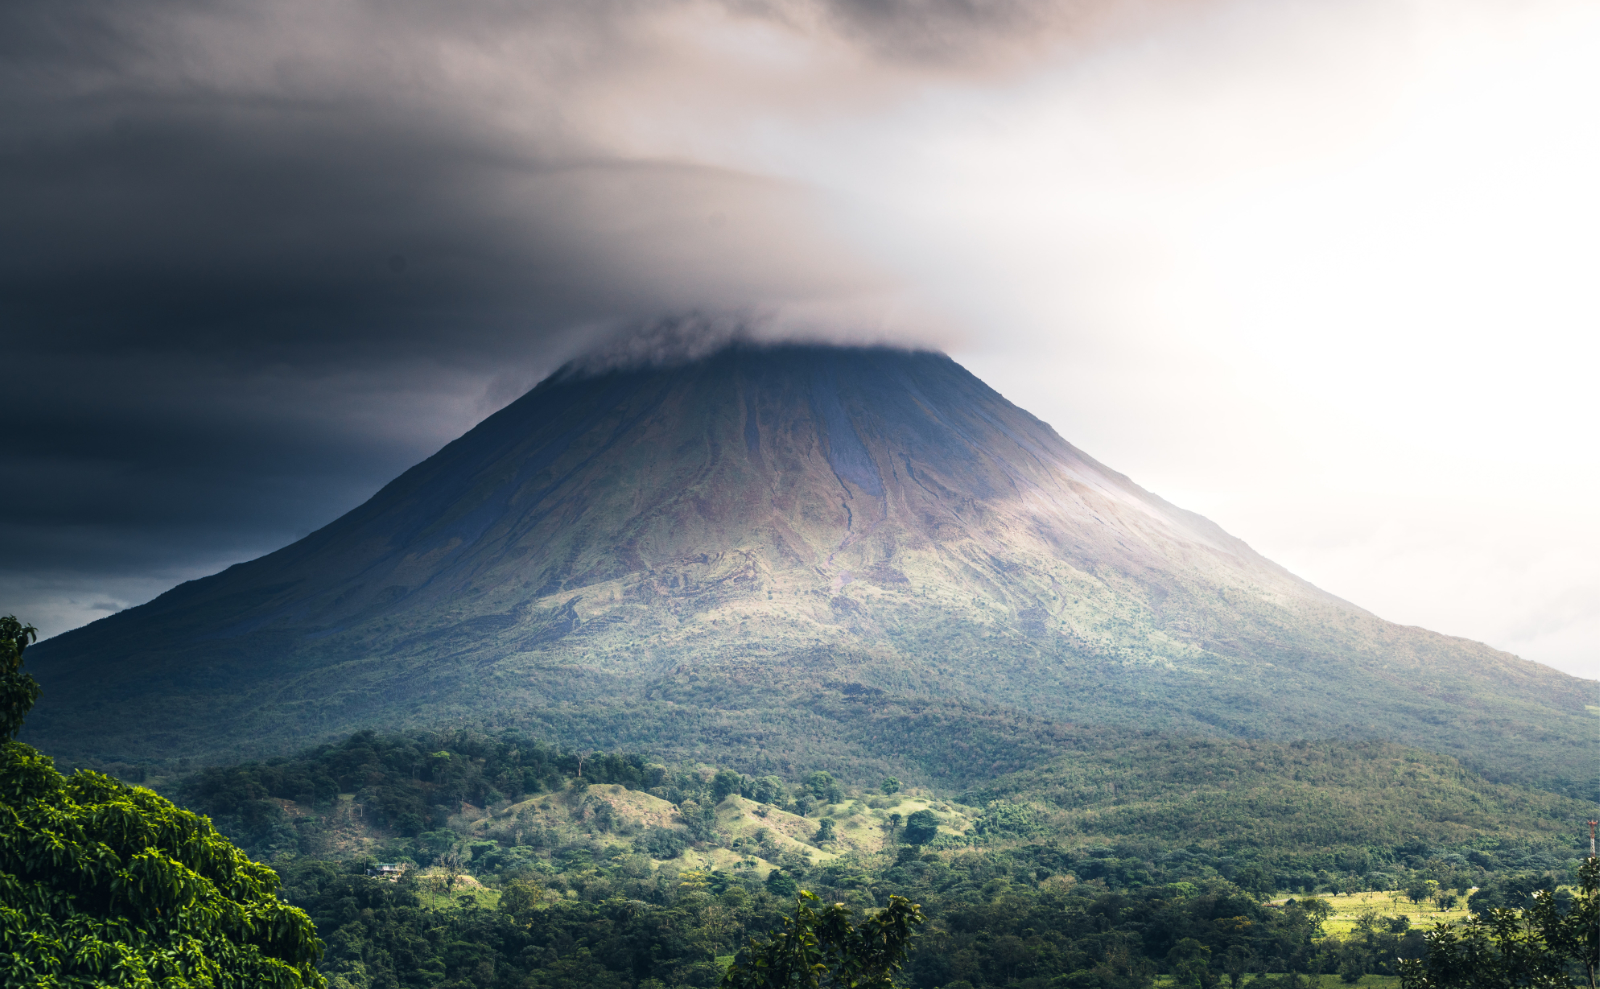 SSoP Podcast Episode 26 — Costa Rica: Cloud Forests, Coffee, and Capuchin Monkeys